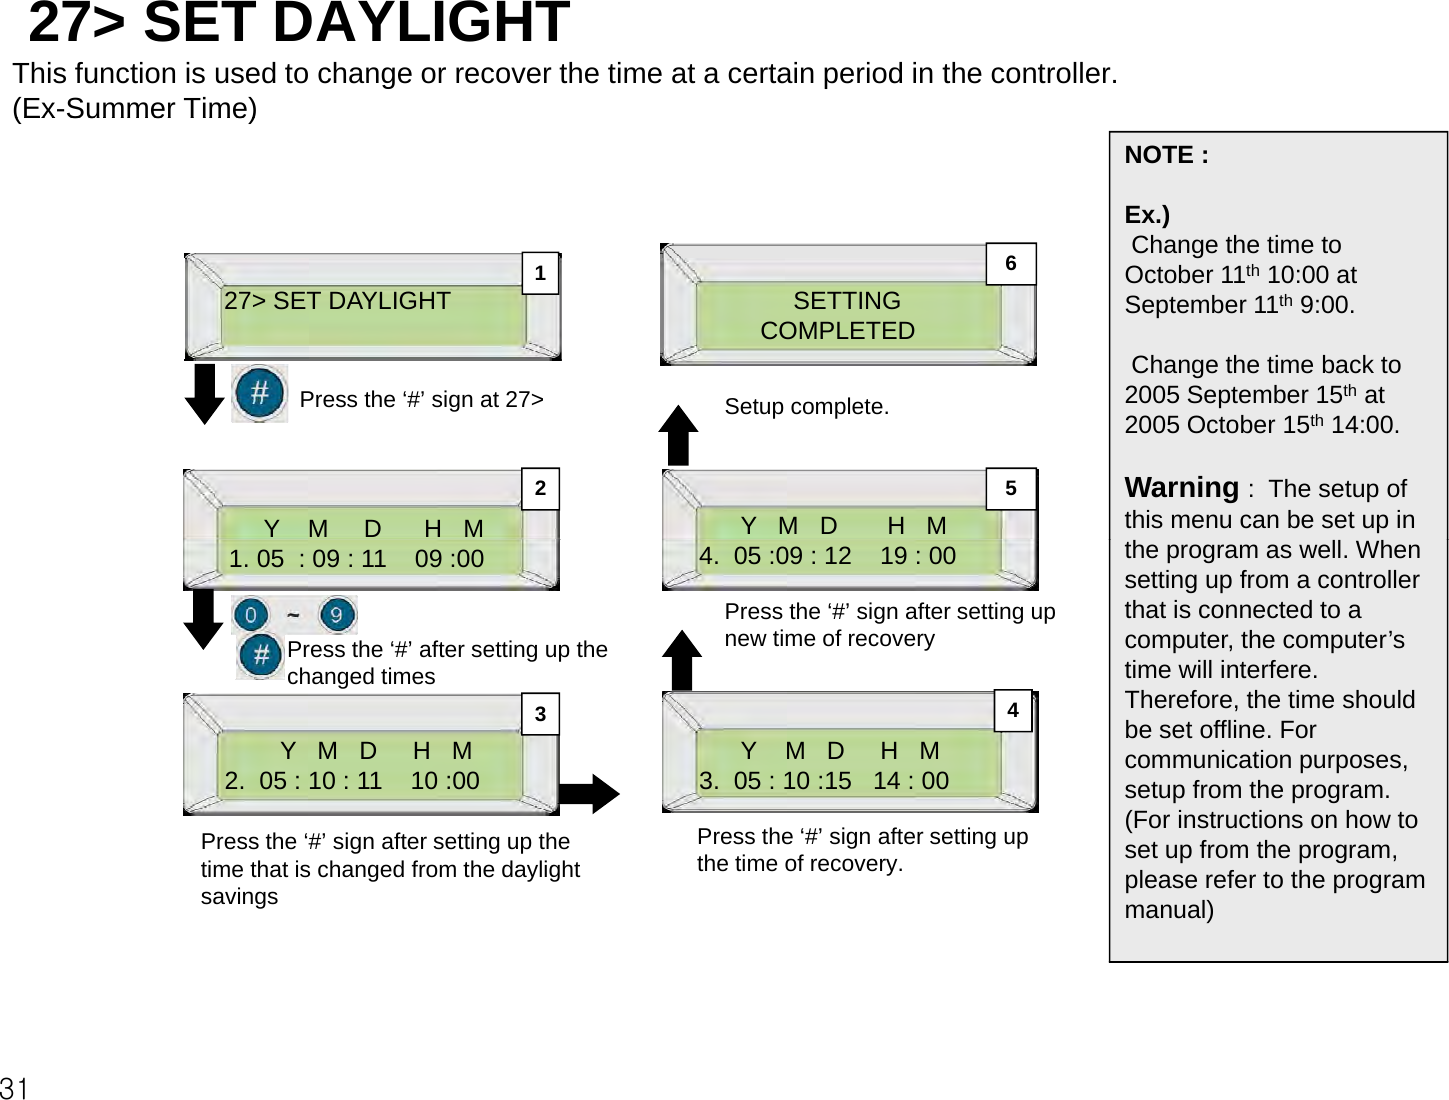 27&gt; SET DAYLIGHT This function is used to change or recover the time at a certain period in the controller.      (Ex-Summer Time)(ExSummer Time) 6NOTE :Ex.)Change the time to 27&gt; SET DAYLIGHT6SETTINGCOMPLETEDSt ltPress the‘#’sign at 27&gt;gOctober 11th 10:00 at September 11th 9:00.Change the time back to 2005 September 15that1Y    M     D      H   M2 5Y   M   D       H   MSetup complete.Press the # sign at 27&gt;2005 September 15at 2005 October 15th 14:00.Warning :  The setup of this menu can be set up in 1. 05  : 09 : 11    09 :00 Press the ‘#’ after setting up the changed times4.  05 :09 : 12    19 : 00Press the ‘#’ sign after setting up new time of recoverythe program as well. When setting up from a controller that is connected to a computer, the computer’s time will interfere. 3Y   M   D     H   M2.  05 : 10 : 11    10 :00 4changed timesY    M   D     H   M3.  05 : 10 :15   14 : 00Therefore, the time should be set offline. For communication purposes, setup from the program. (For instructions on how toPress the ‘#’ sign after setting up the time that is changed from the daylight savingsPress the ‘#’ sign after setting up the time of recovery.(For instructions on how to set up from the program, please refer to the program manual)31